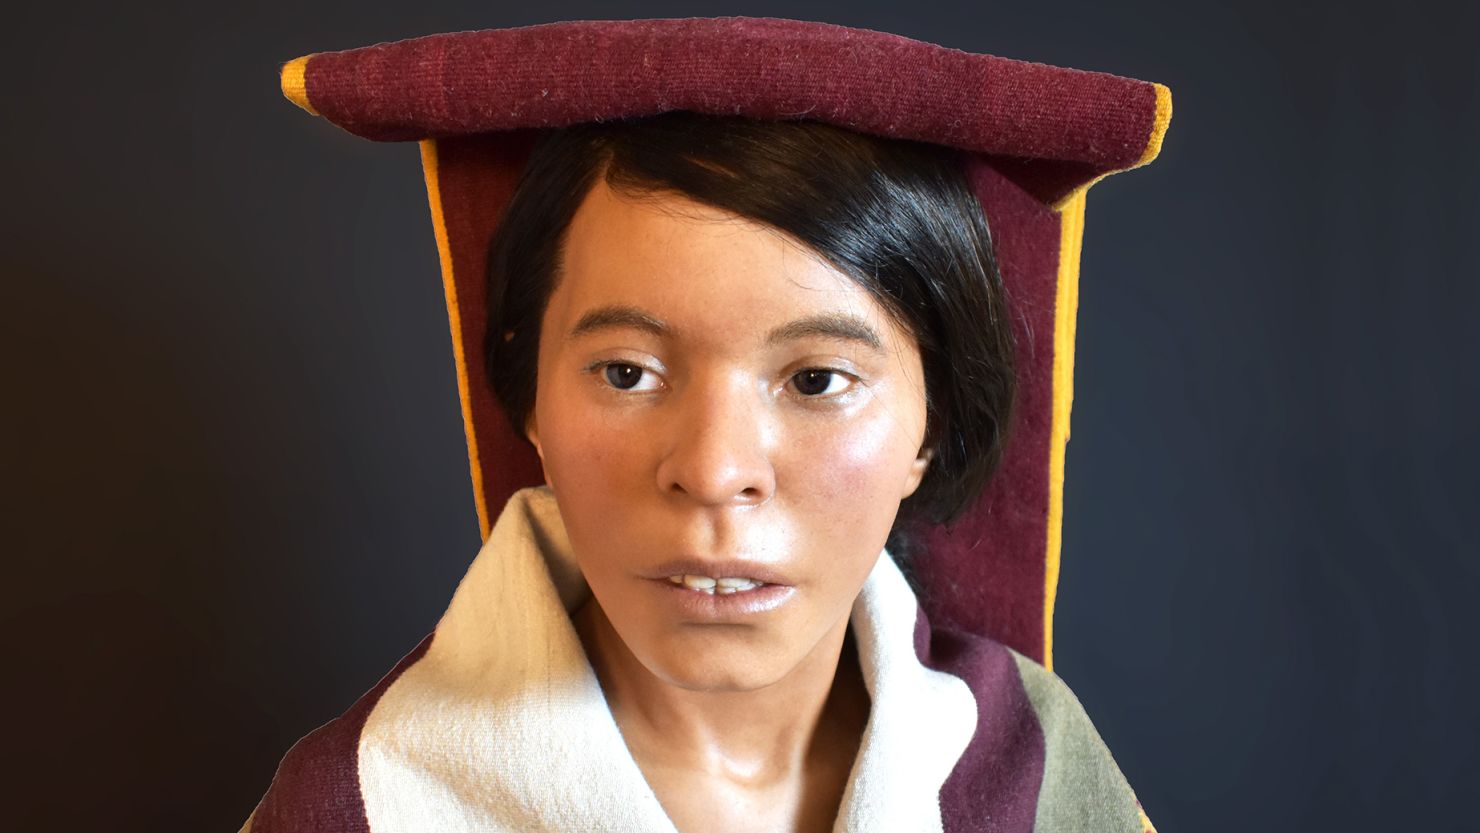 Oscar Nilsson spent 400 hours on his 3D reconstruction of the Ice Maiden, a 500-year-old mummy of a young Inca Woman found in the Peruvian Andes 28 years ago.